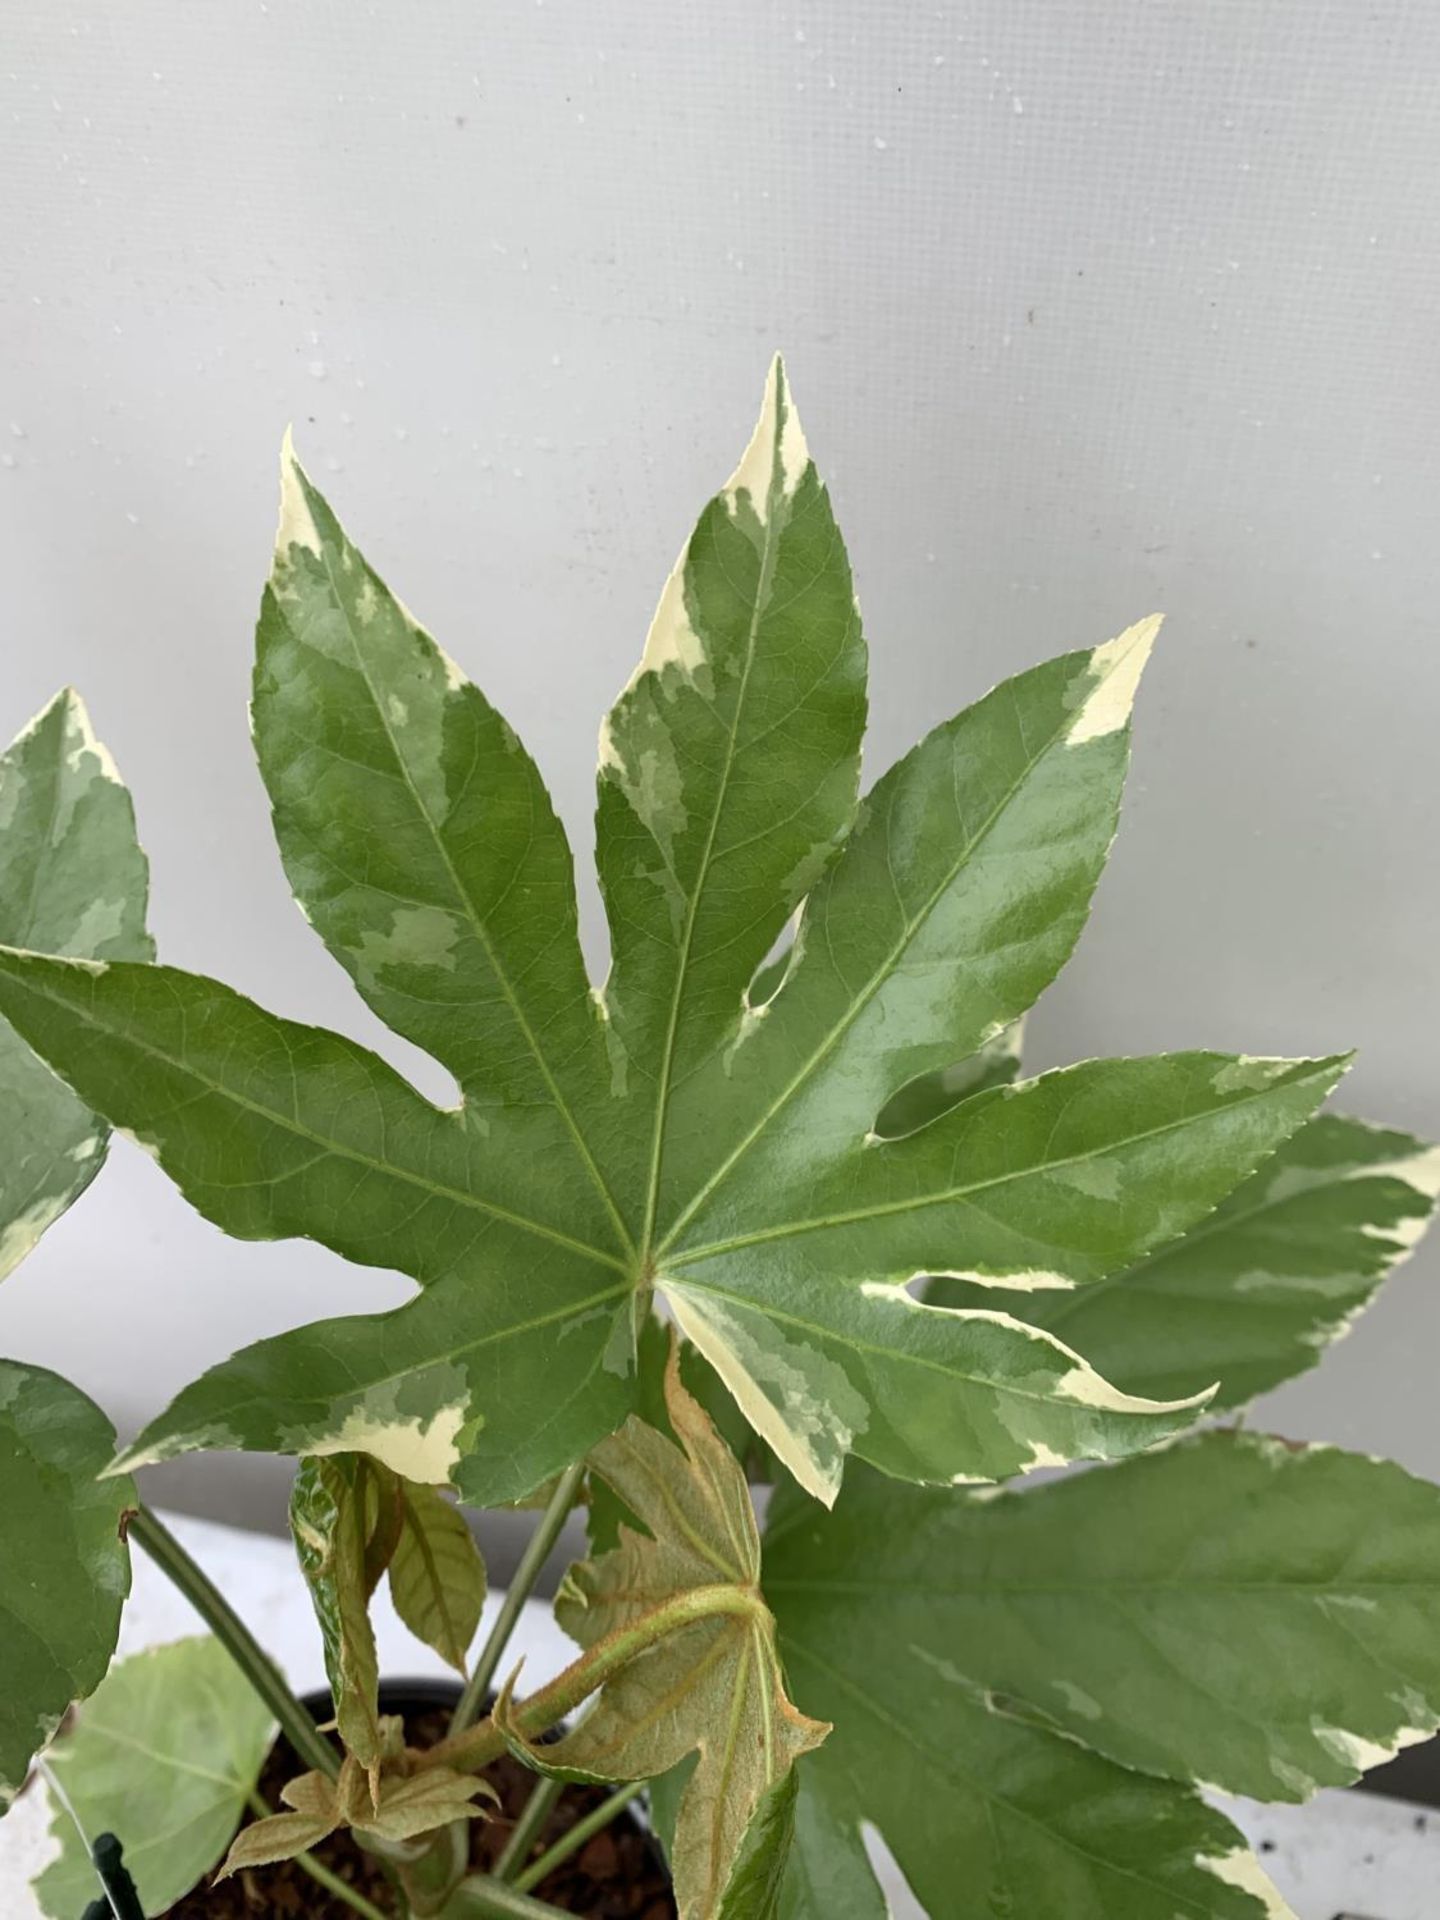 TWO FATSIA JAPONICA VARIEGATA AND FATSIA POLYCARPA 'GREEN FINGERS' IN 2 LTR POTS 50CM TALL PLUS - Image 8 of 8